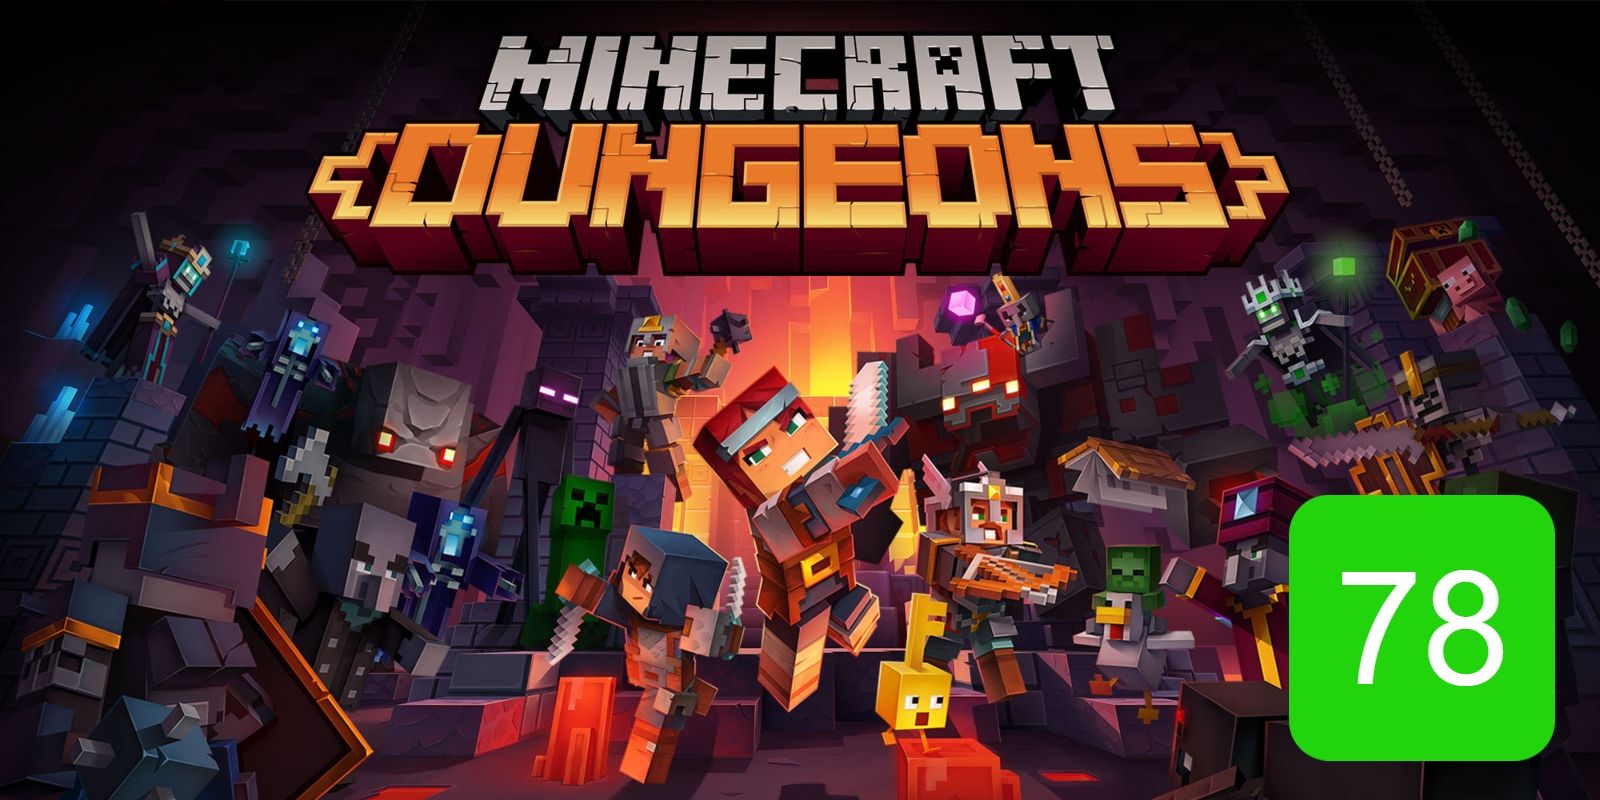 The PS4 Metascore for Minecraft Dungeons